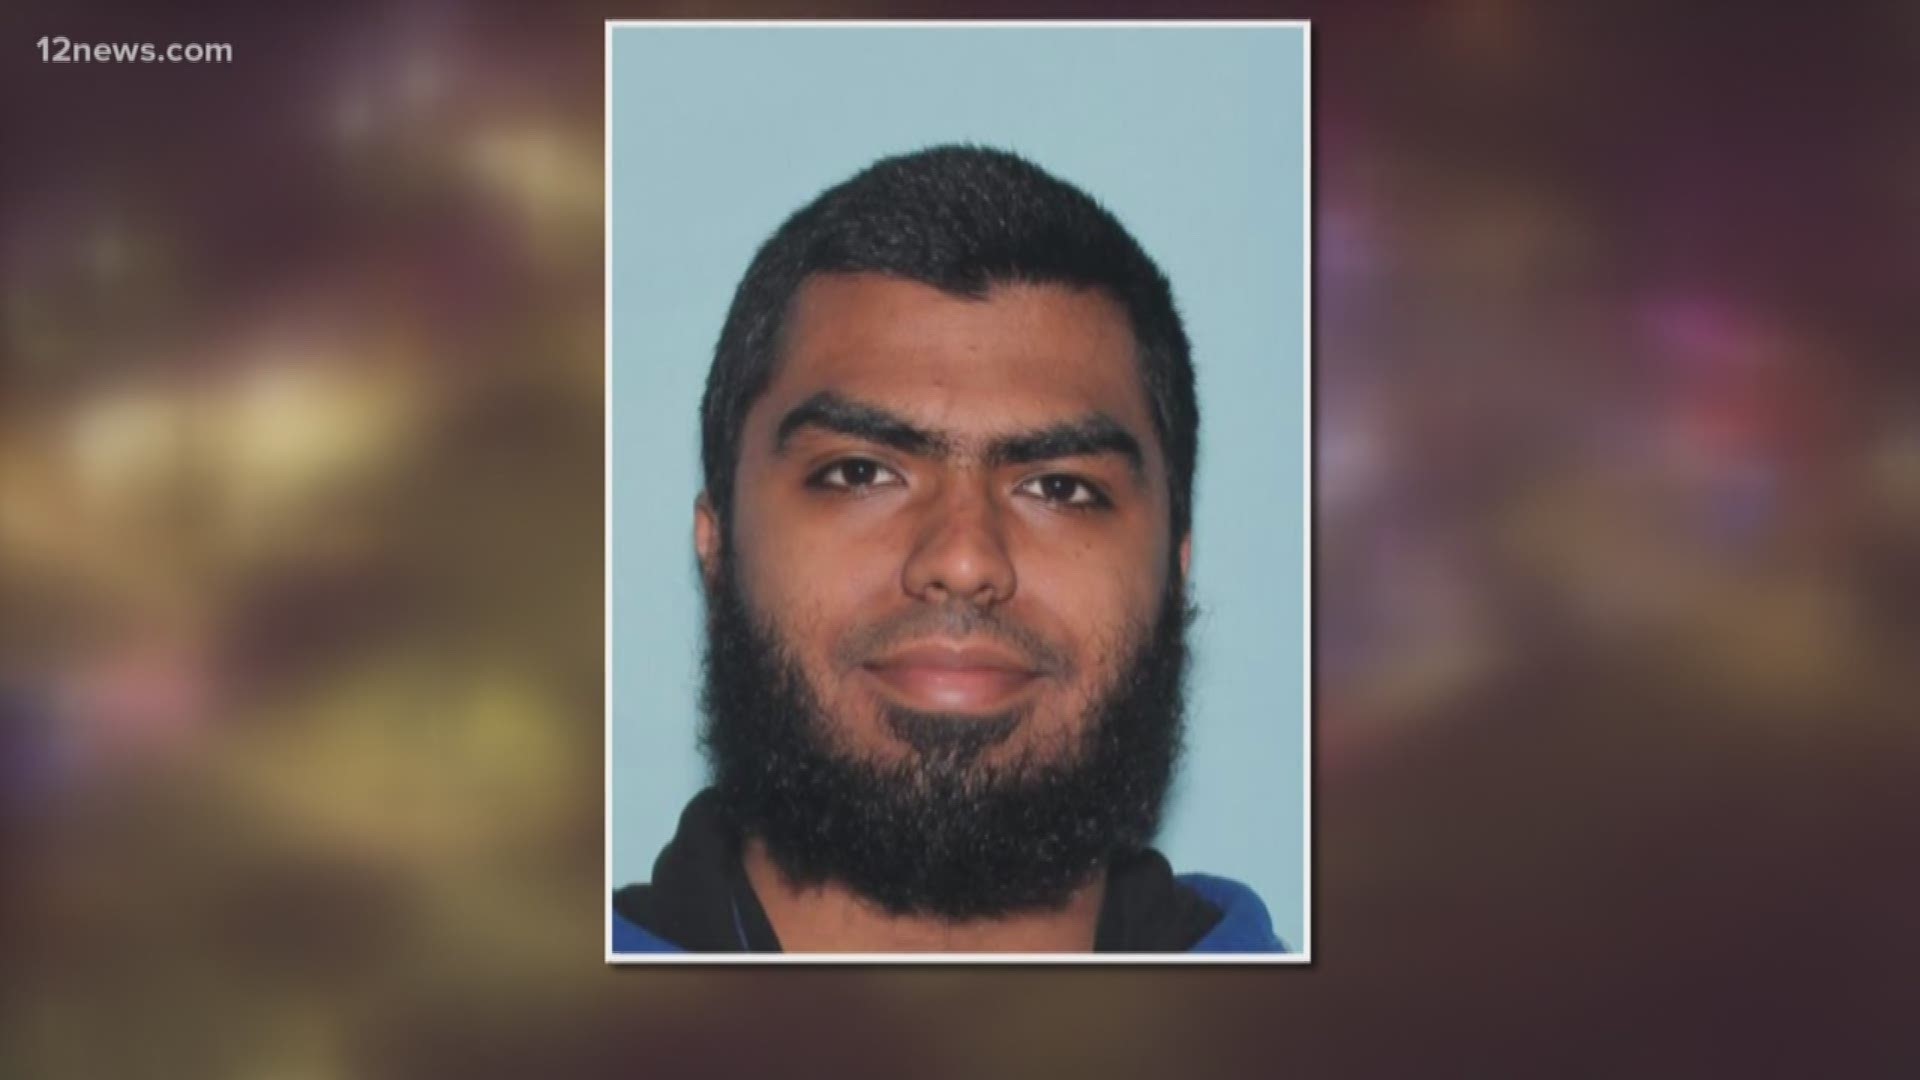 The FBI is calling the Hamed a homegrown violent extremist of HVE. Authorities say he was acting as a lone wolf and had every intention of killing the deputy.